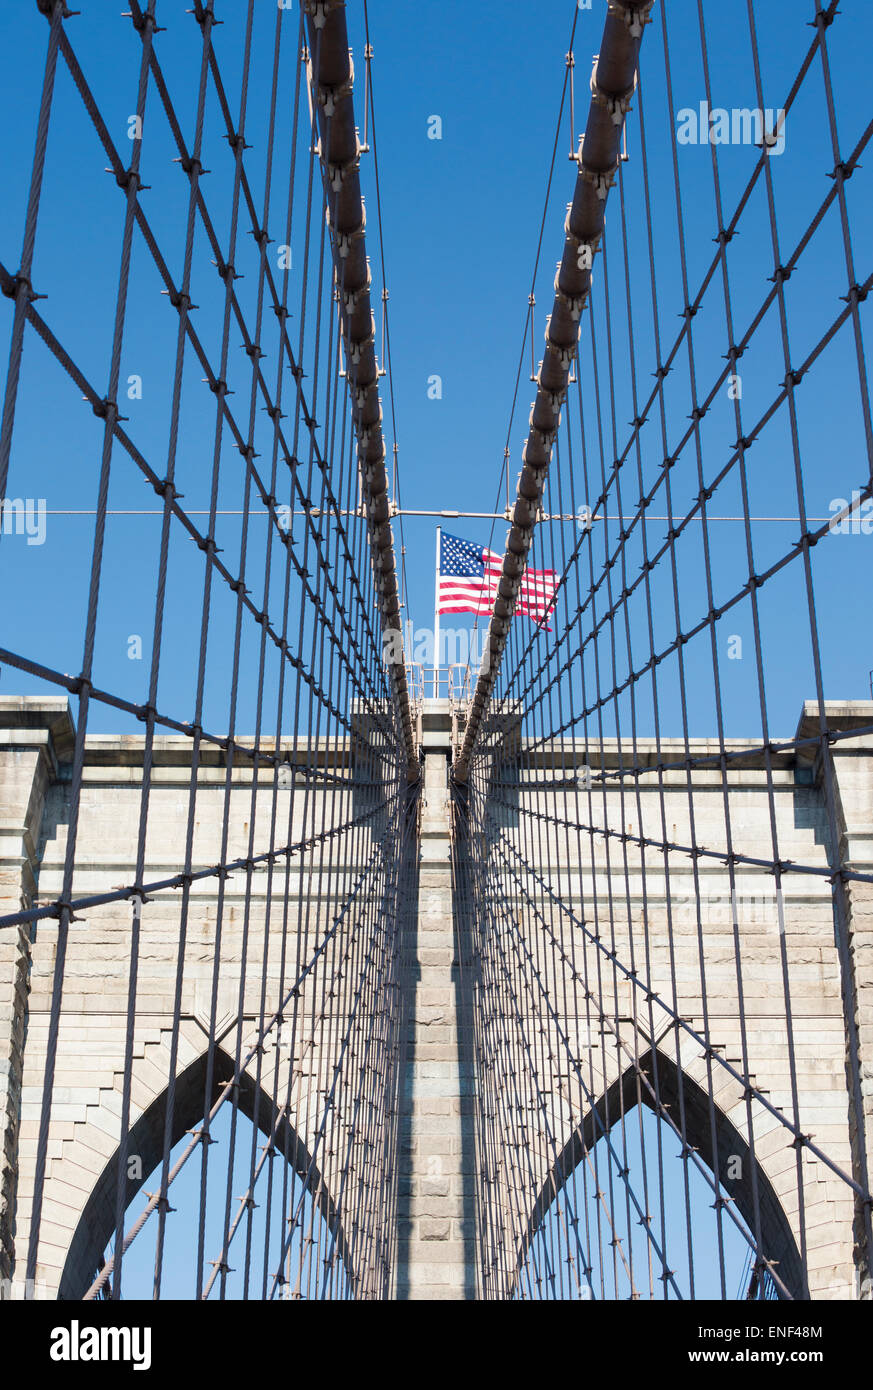 New York, New York State, United States of America.  Brooklyn Bridge with the American flag flying above the cables and distinct Stock Photo